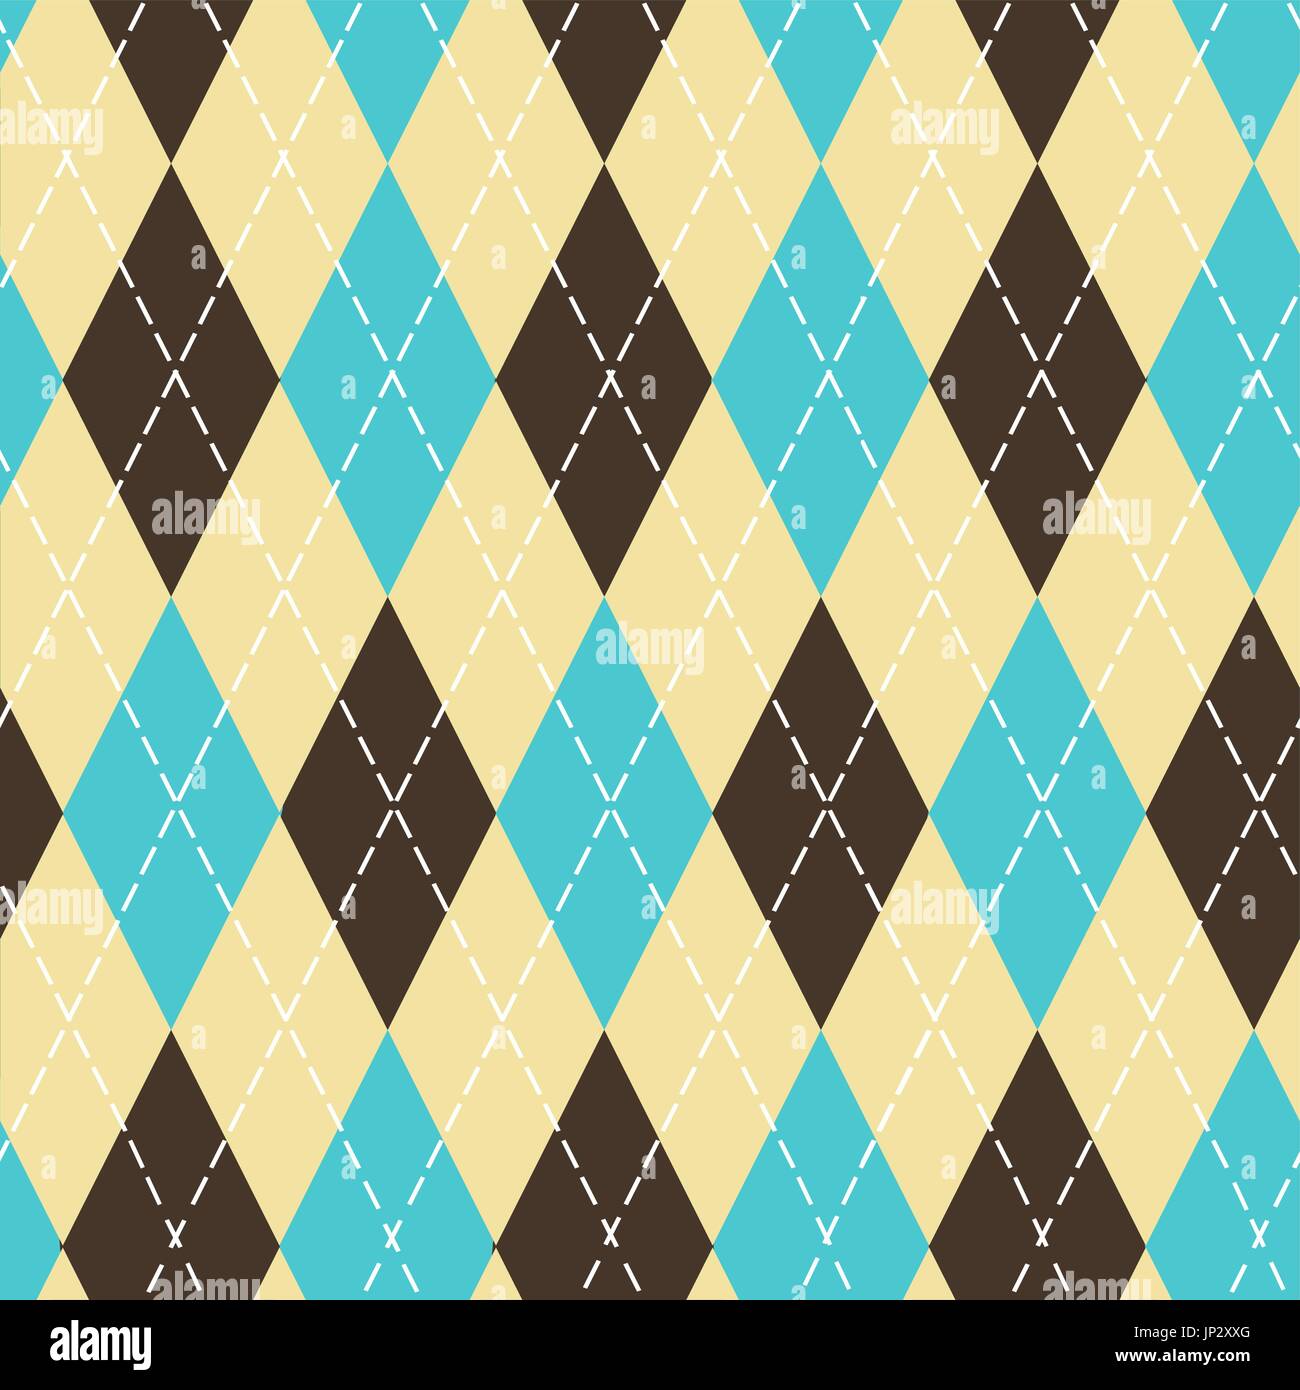 Seamless argyle pattern with chaotic golden dots. Traditional diamond check print. Vintage seamless background. Stock Vector